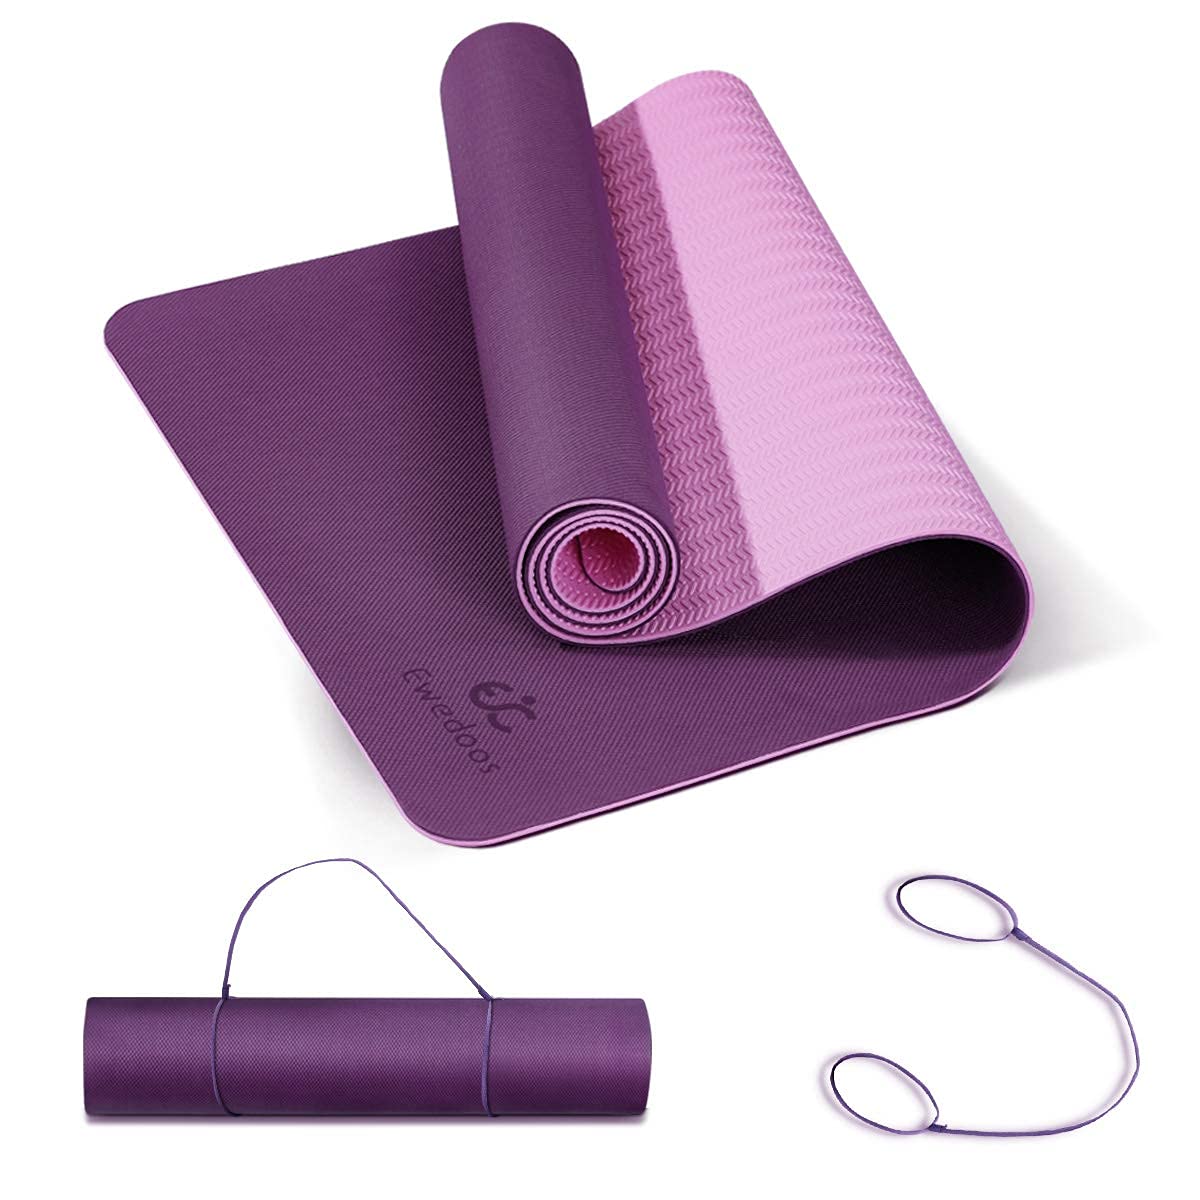 Ewedoos Yoga Mat Non Slip TPE Yoga Mats Exercise Mat Eco Friendly Workout Mat for Yoga, Pilates and Floor Exercise Thick Fitness Mat Carry Strap Included